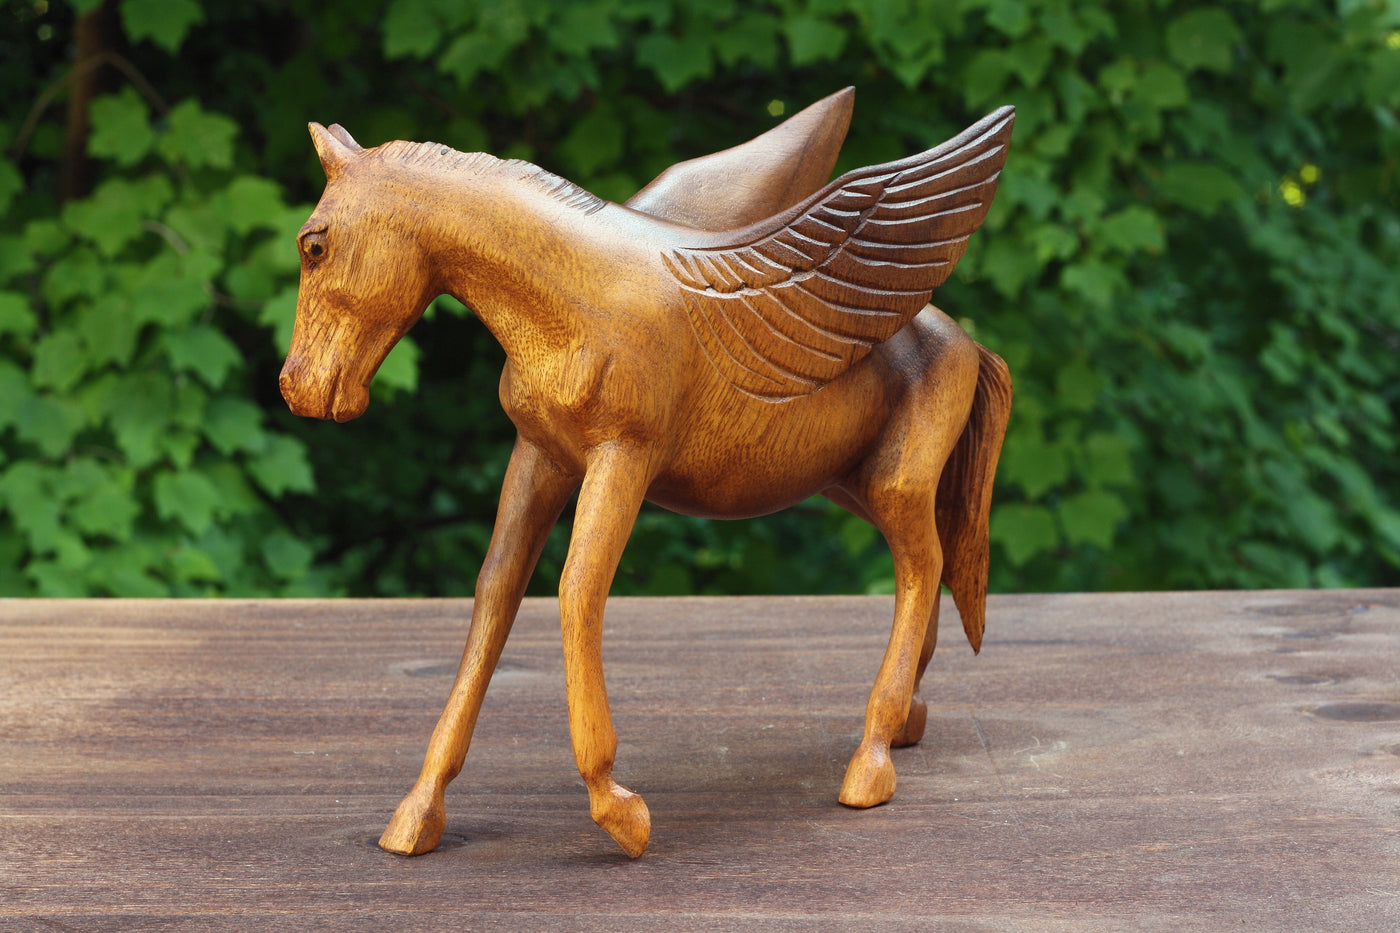 Wooden Hand Carved Horse Pegasus Art Figurine Statue Sculpture Handcrafted Handmade Decorative Home Decor Accent Decoration